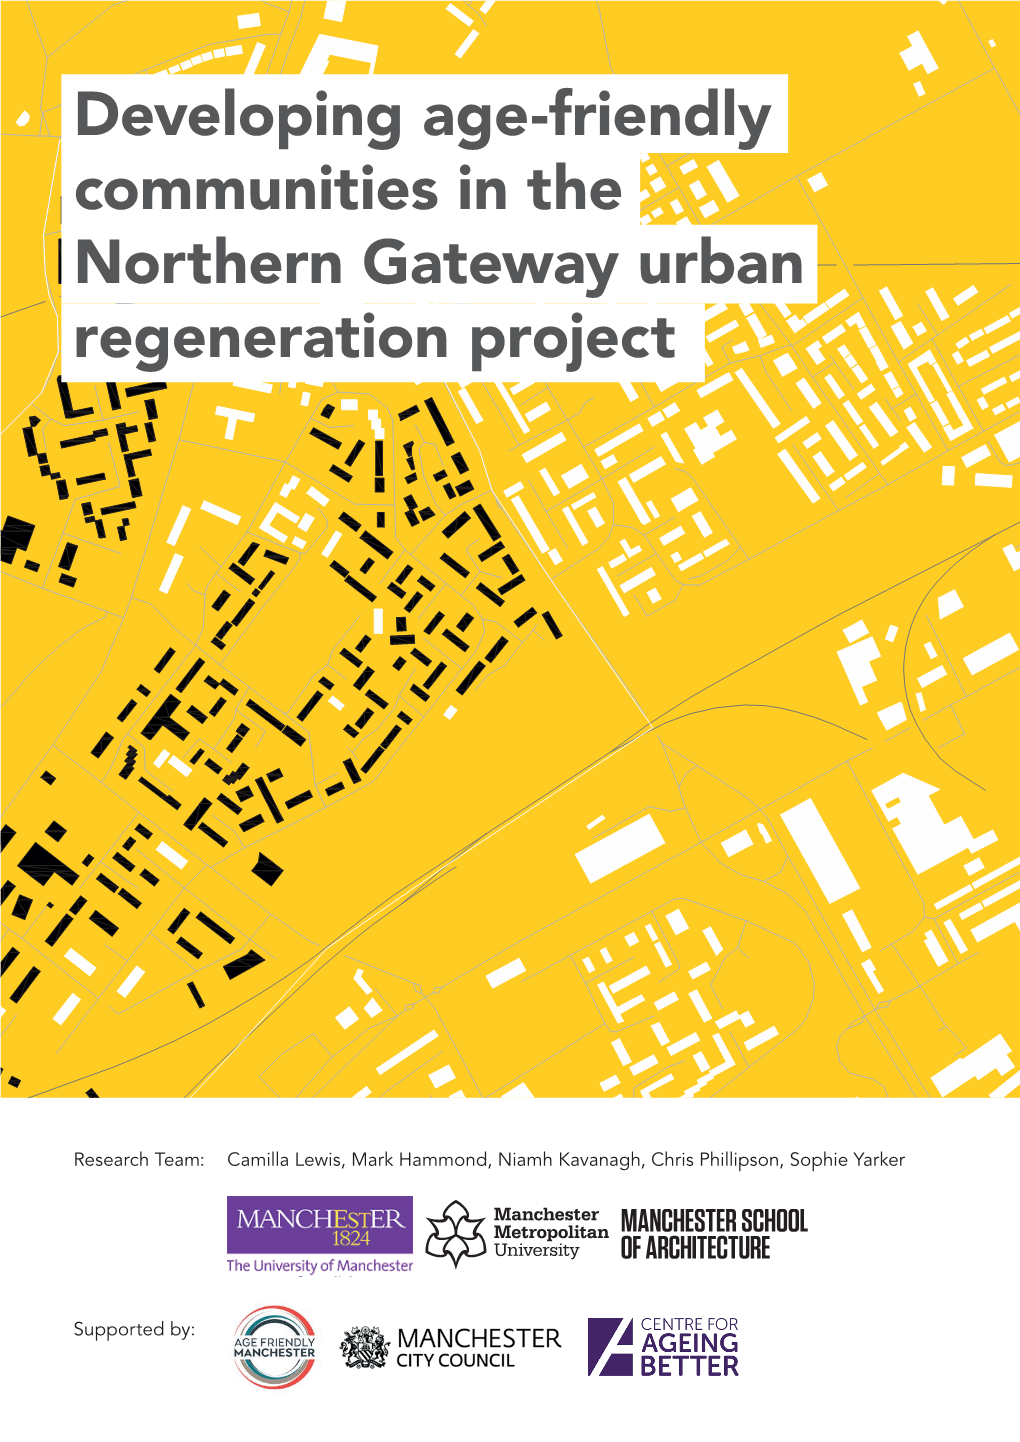 Developing Age-Friendly Communities in the Northern Gateway Urban Regeneration Project PRODUCED by an AUTODESK STUDENT VERSION PRODUCED by an AUTODESK STUDENT VERSION